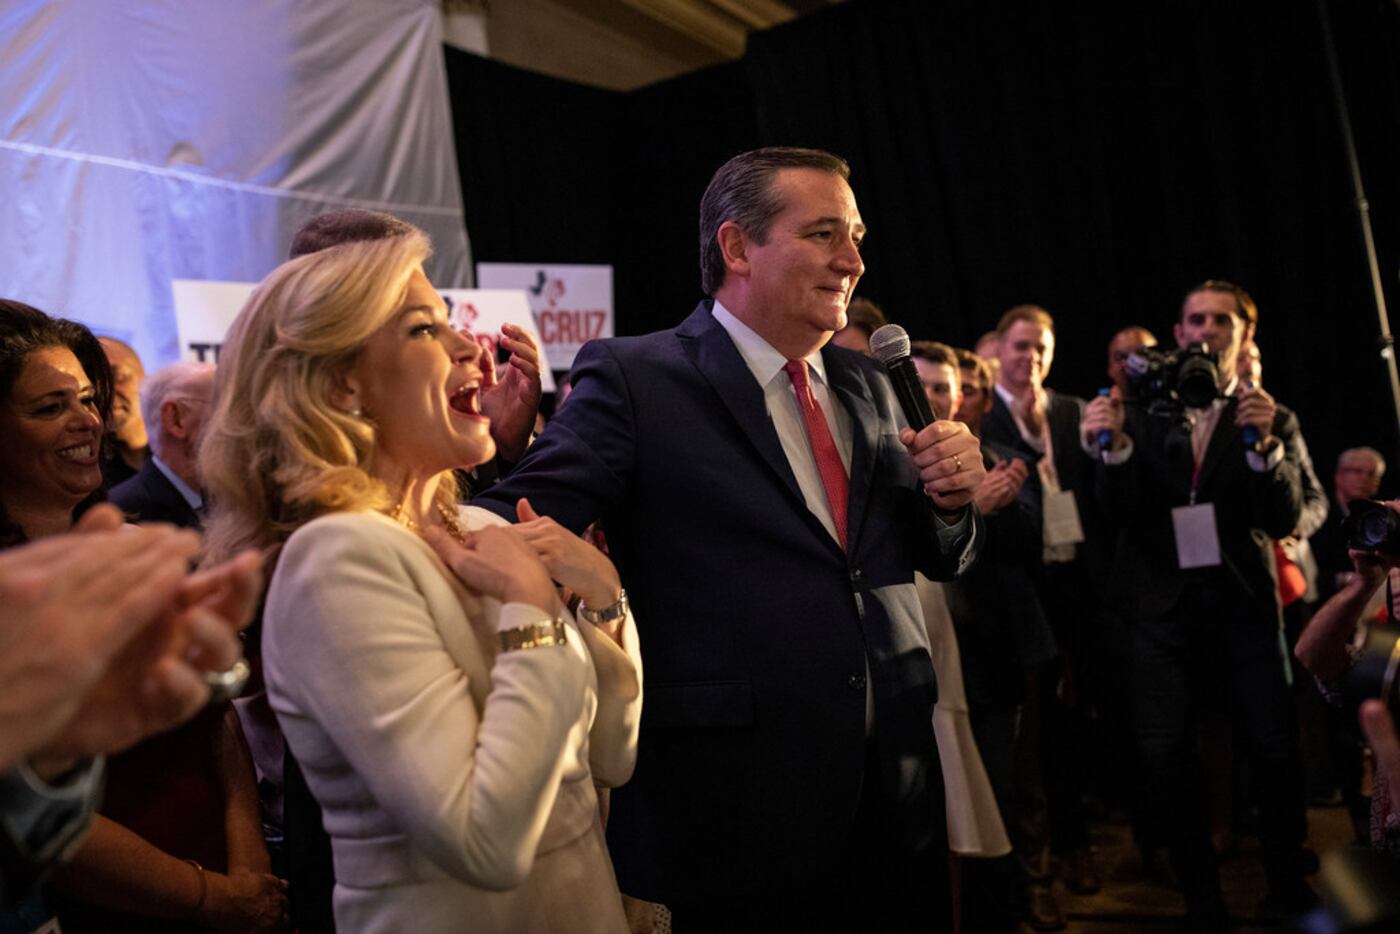 Sen. Ted Cruz speaks at his election night victory party in Houston on Nov. 6, 2018.